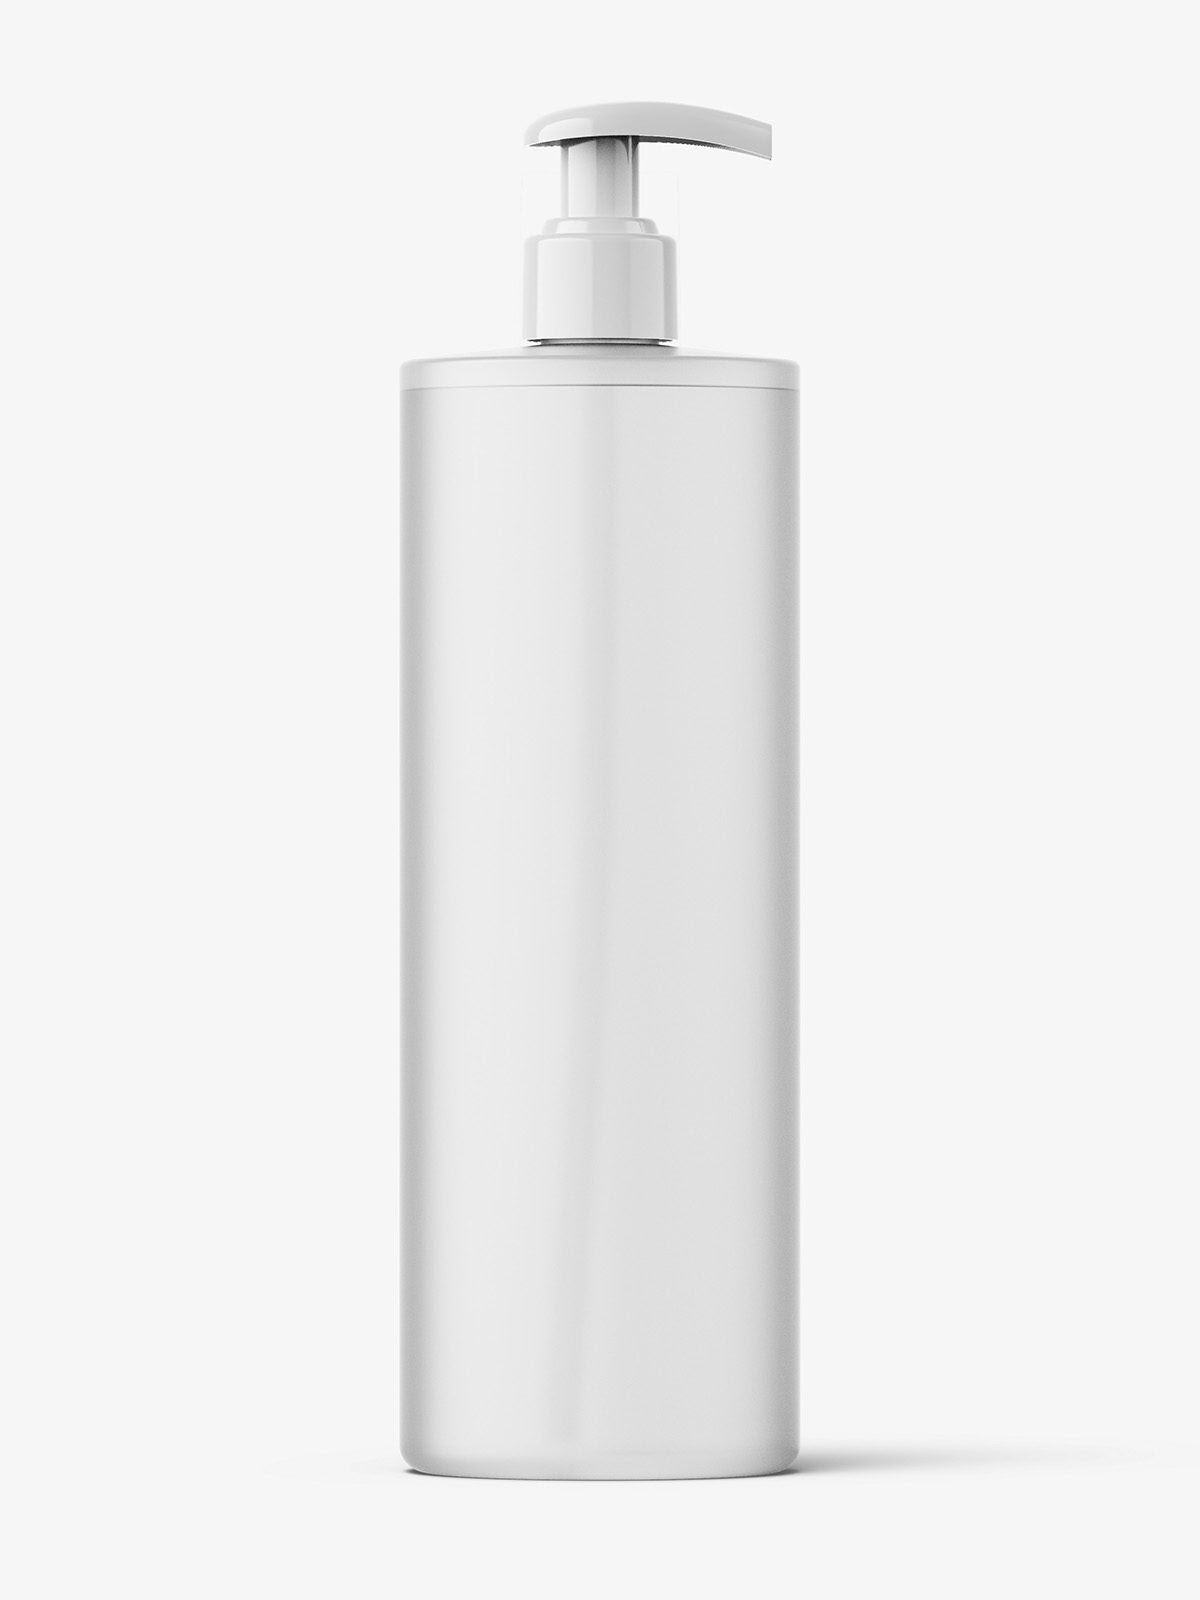 Frosted bottle with pump mockup / 500 ml Smarty Mockups